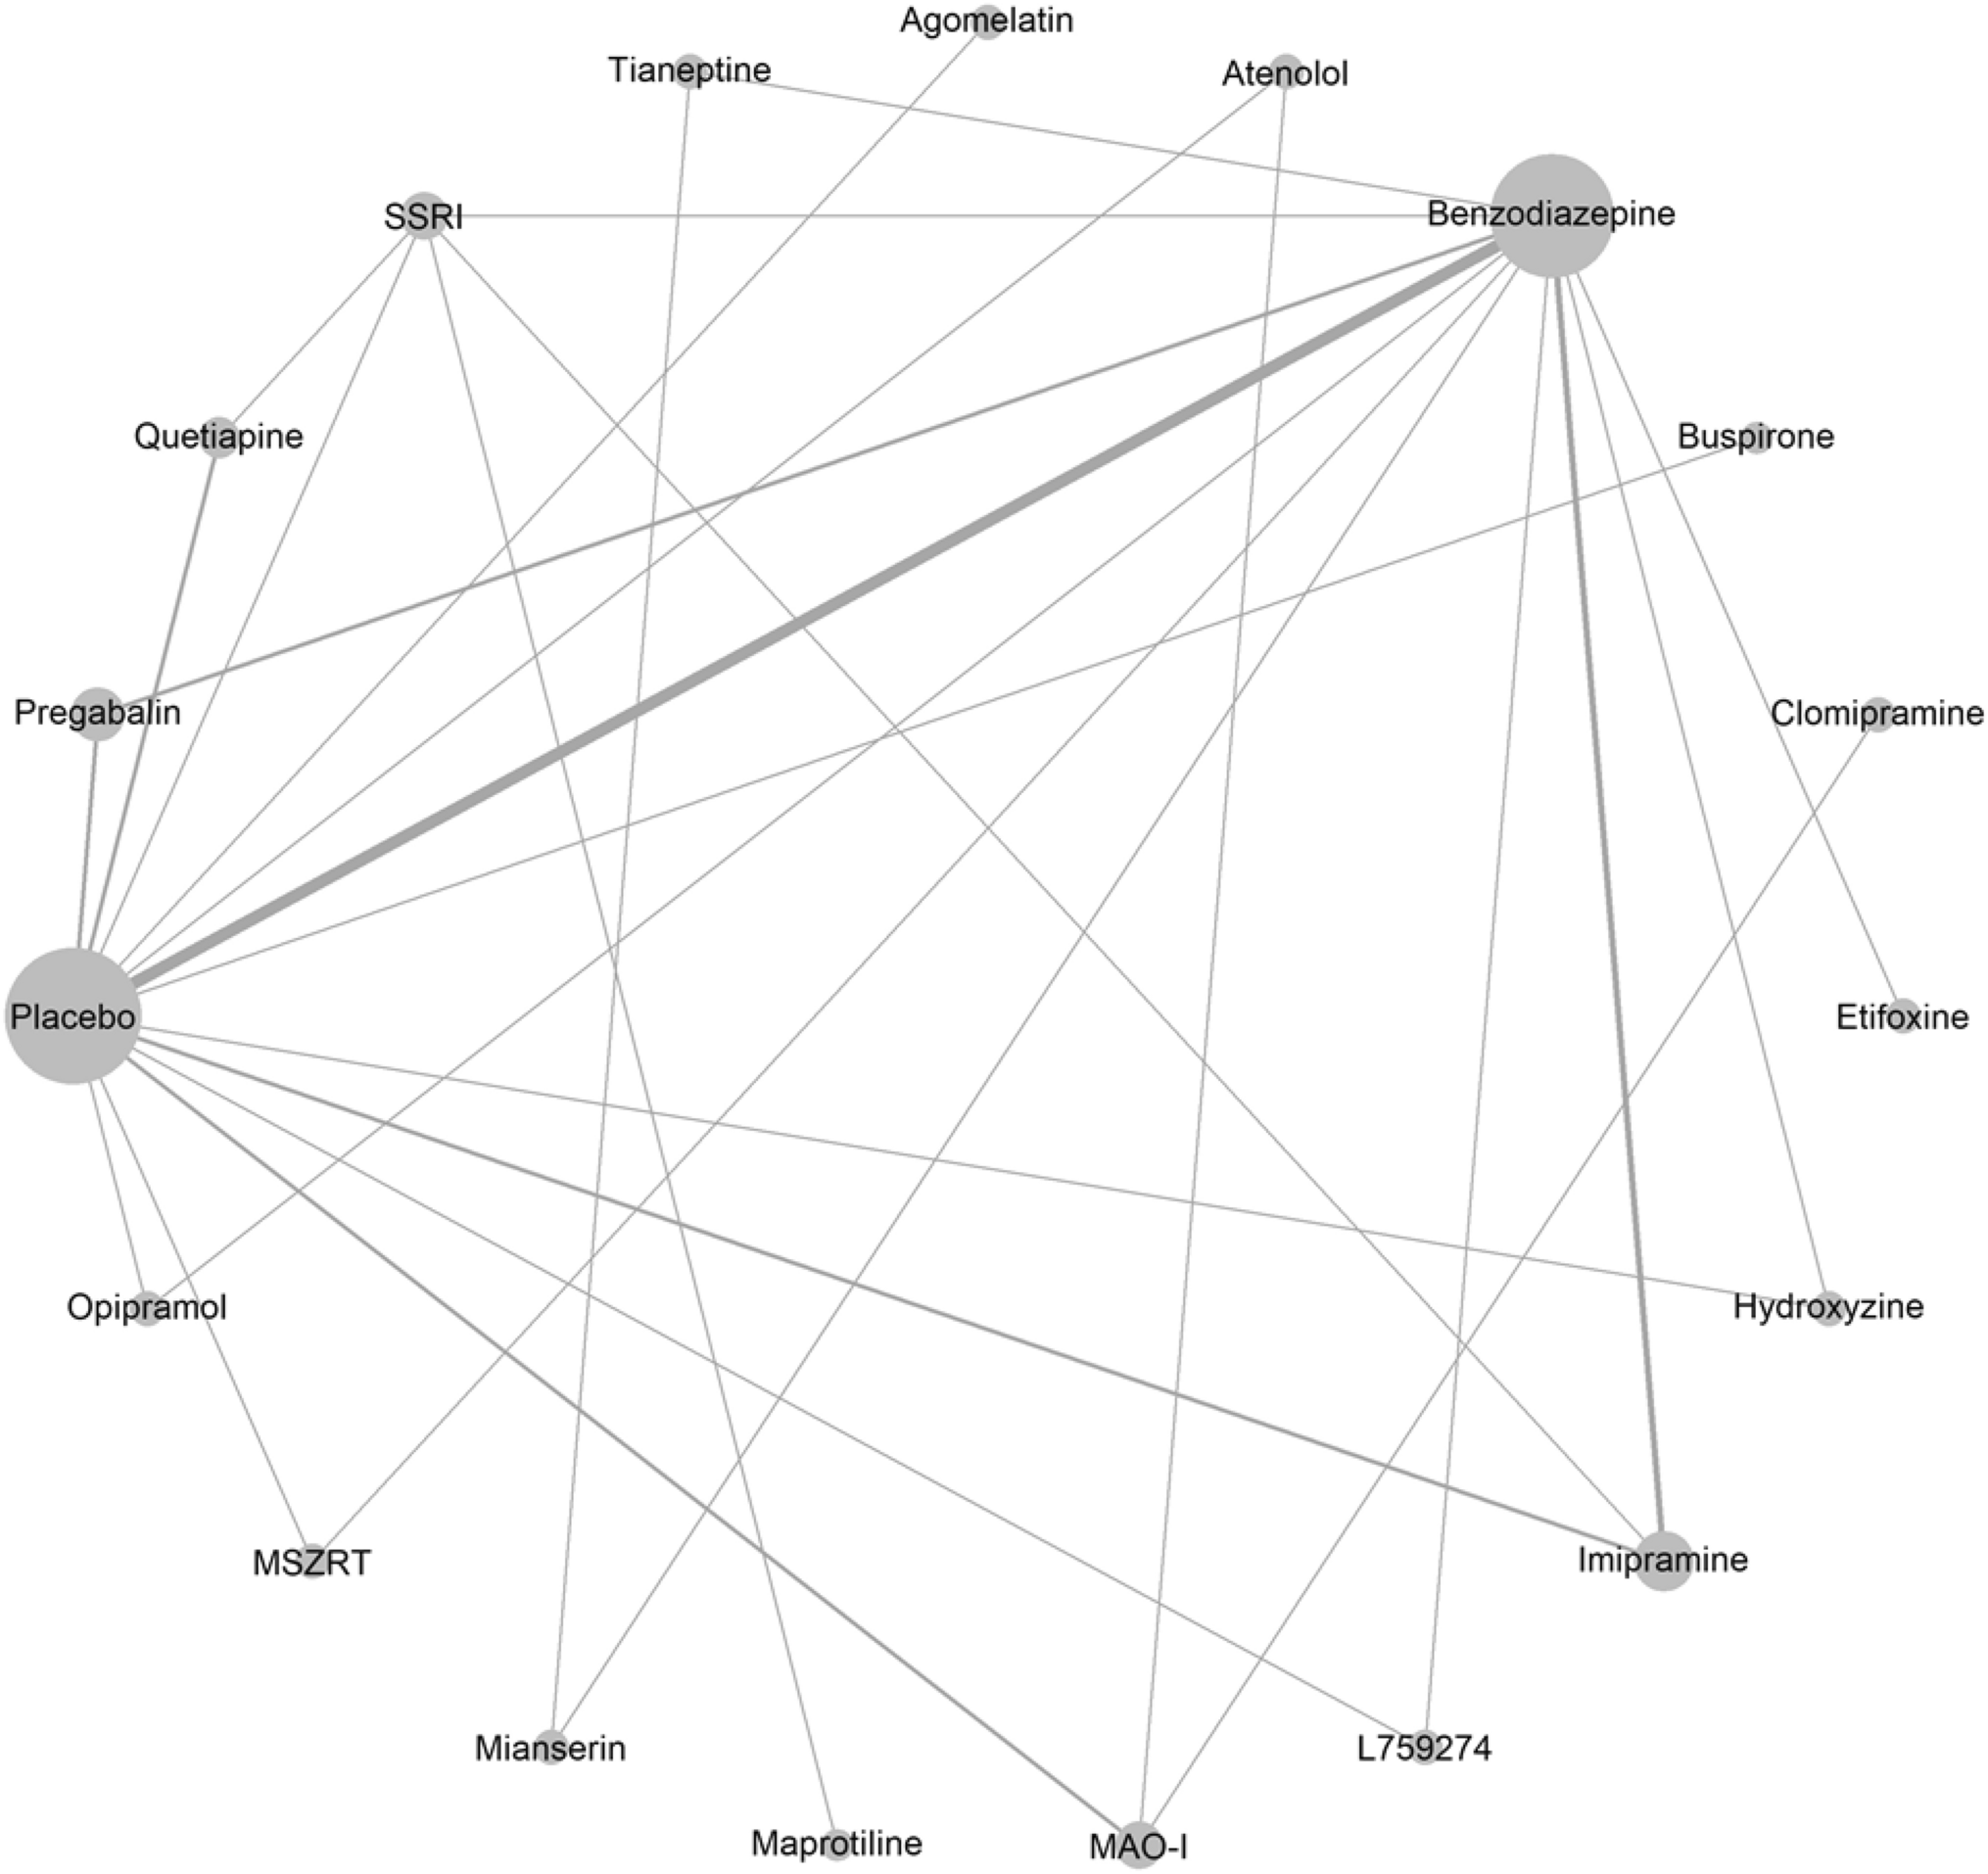 Minor tranquillizers for short-term treatment of newly onset symptoms of anxiety and distress: a systematic review with network meta-analysis of randomized trials